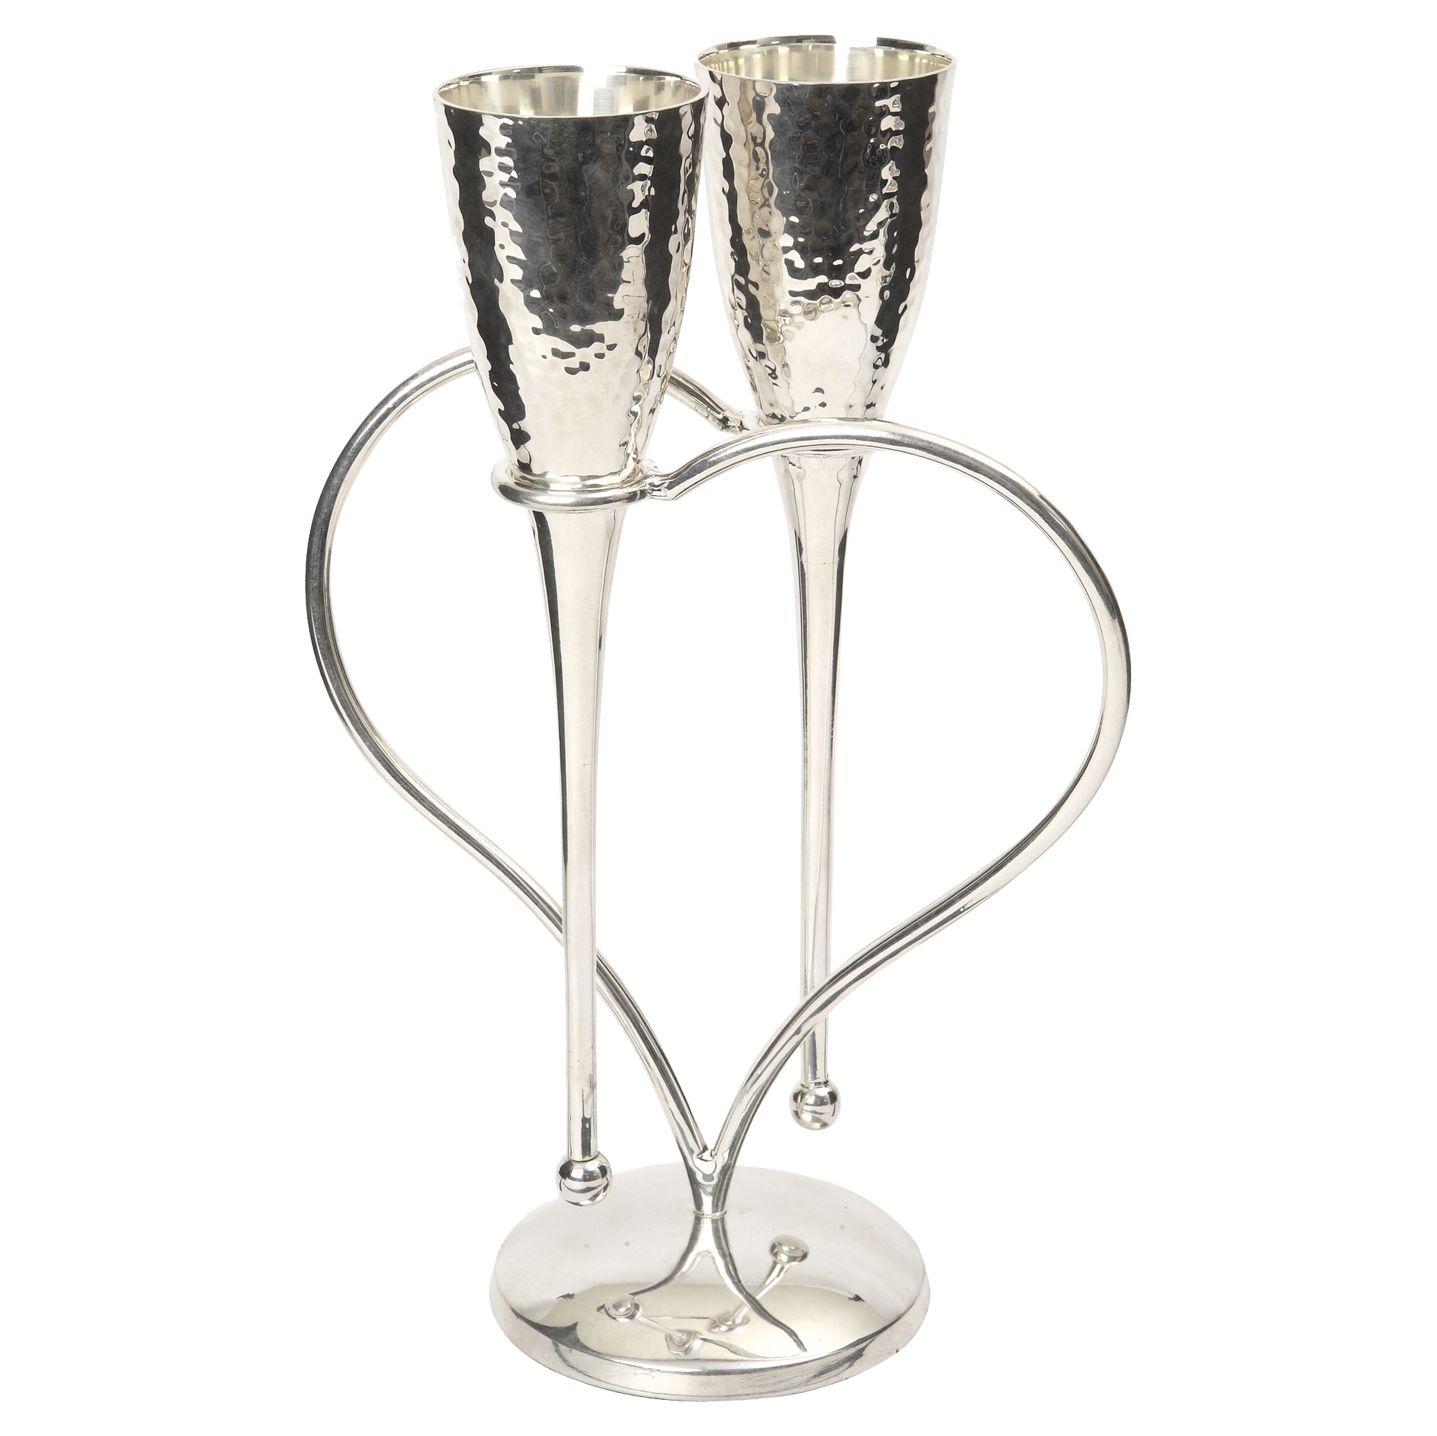 Culinary Concepts Amore Heart Champagne Flutes on a Stand, Set of 2